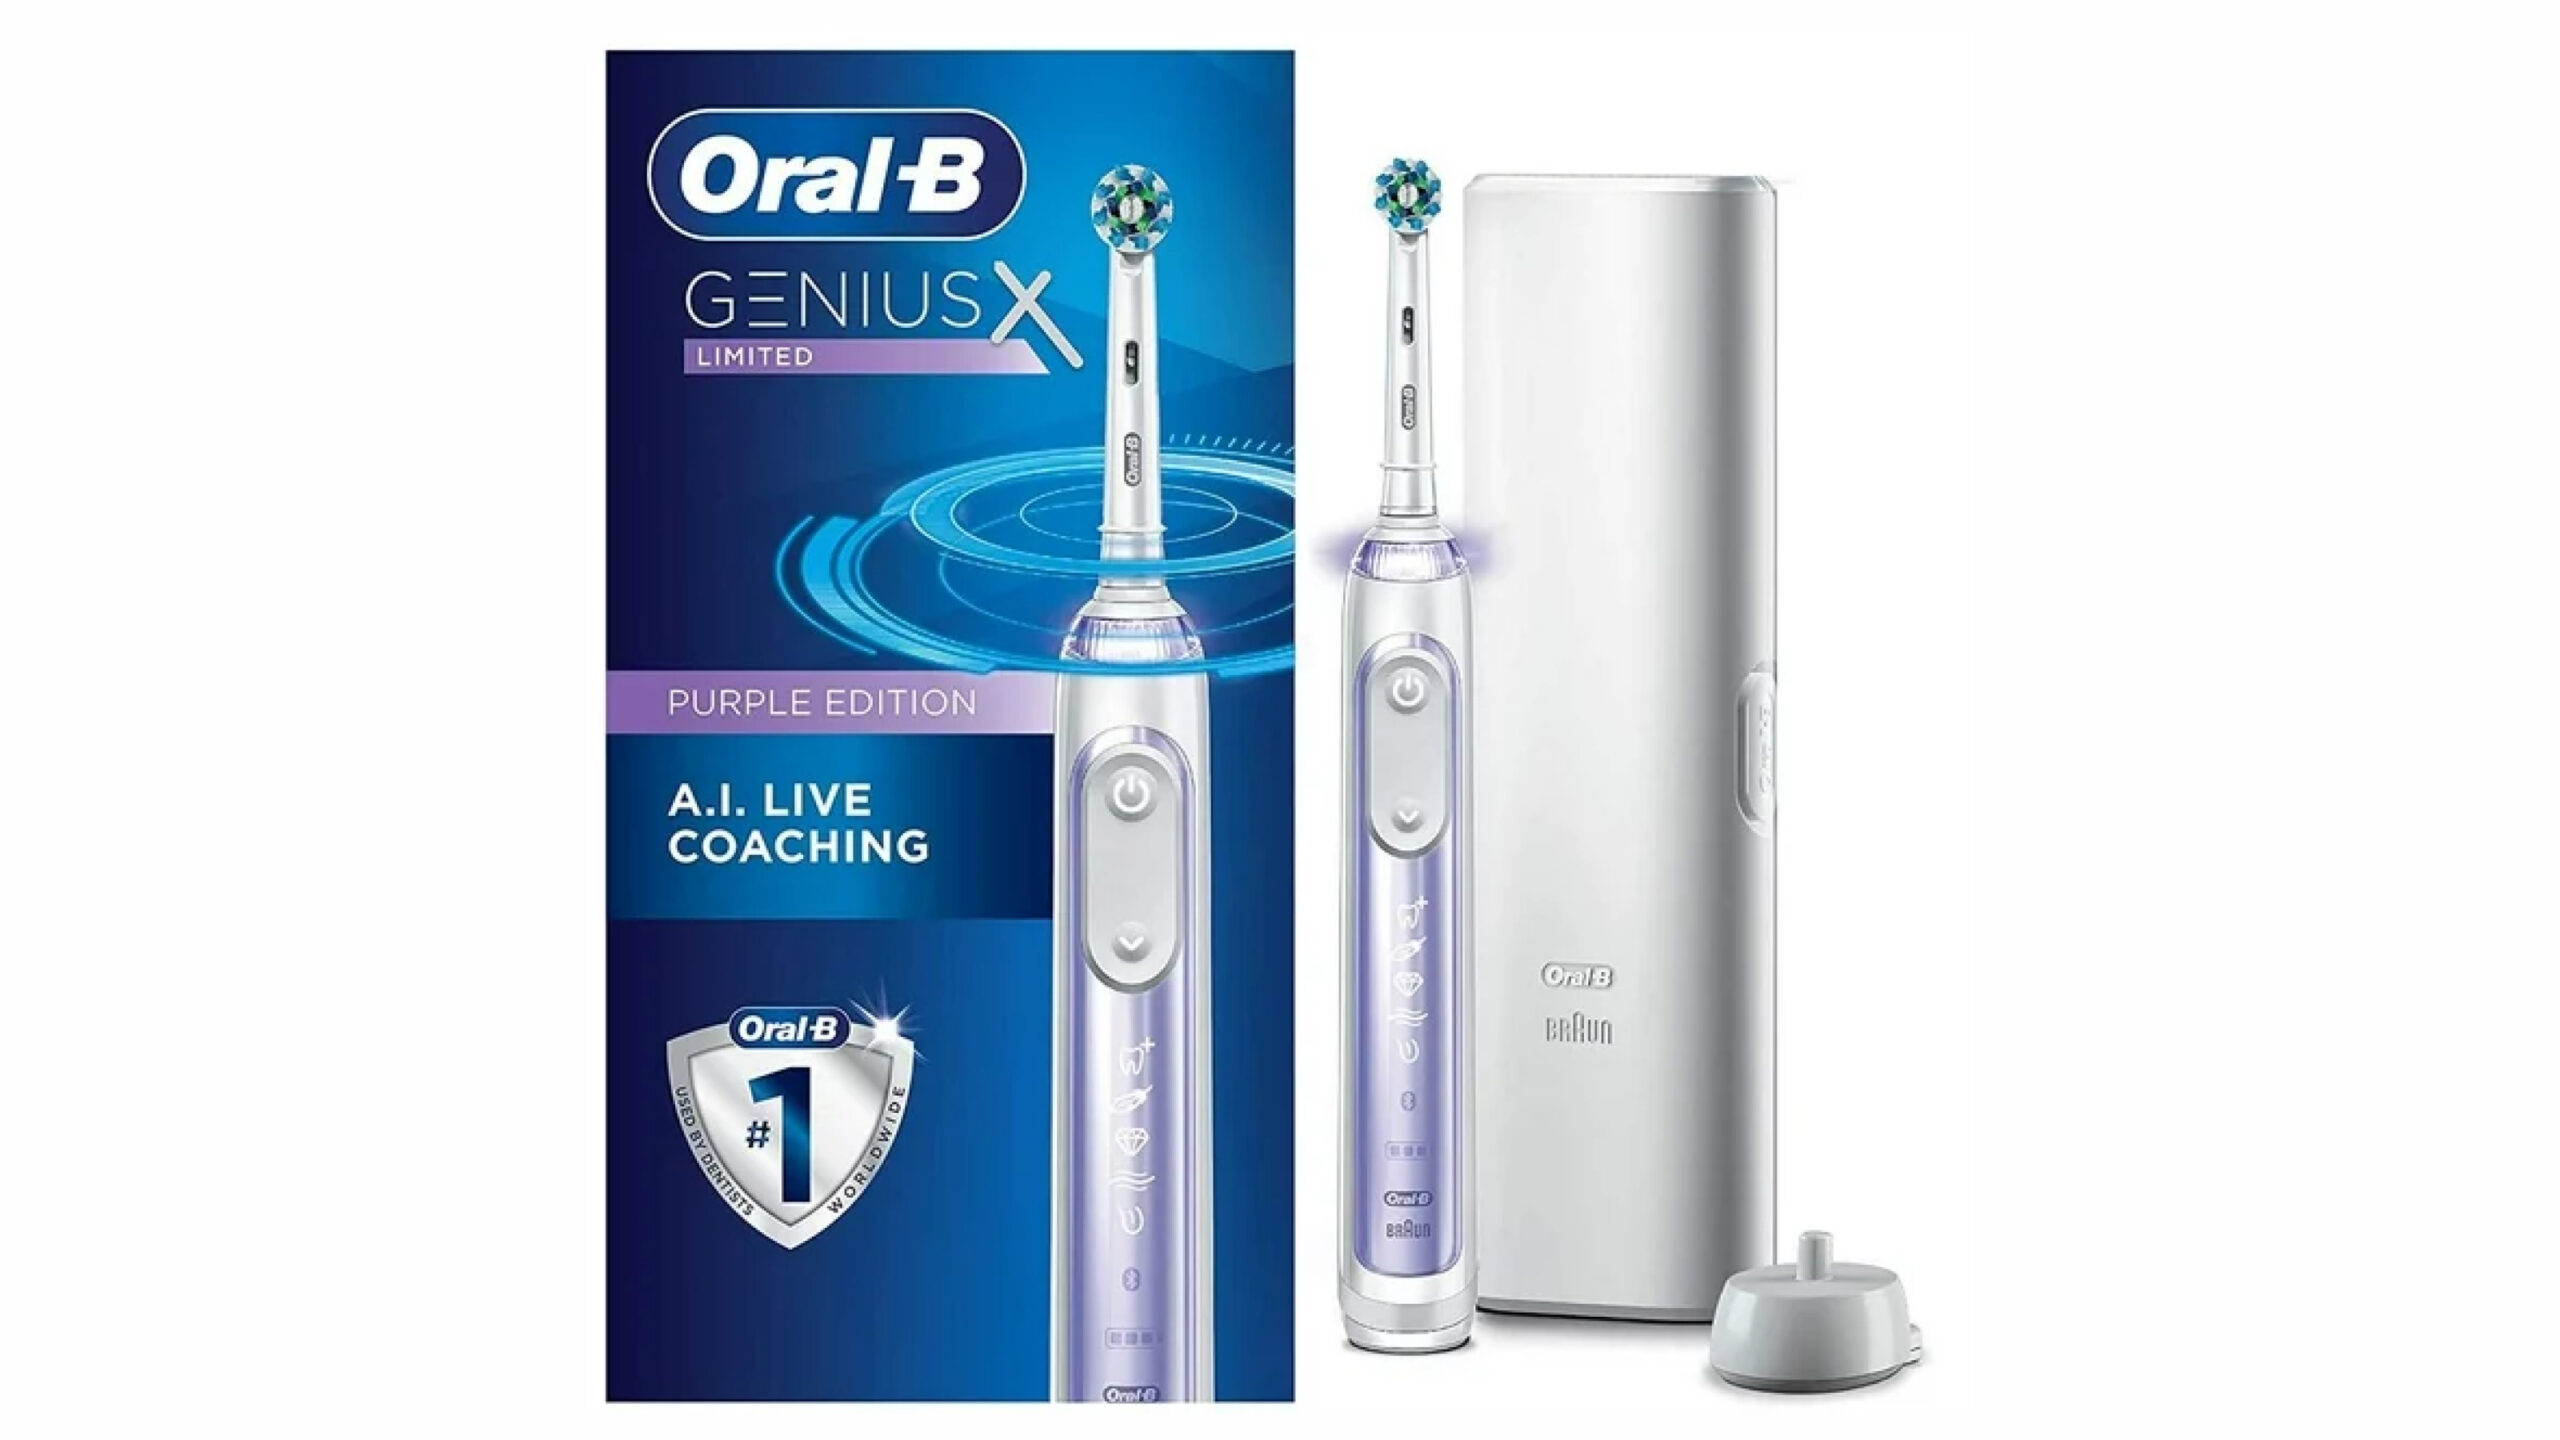 display of orchid purple oral-b genius x rechargeable electric toothbrush with artificial intelligence